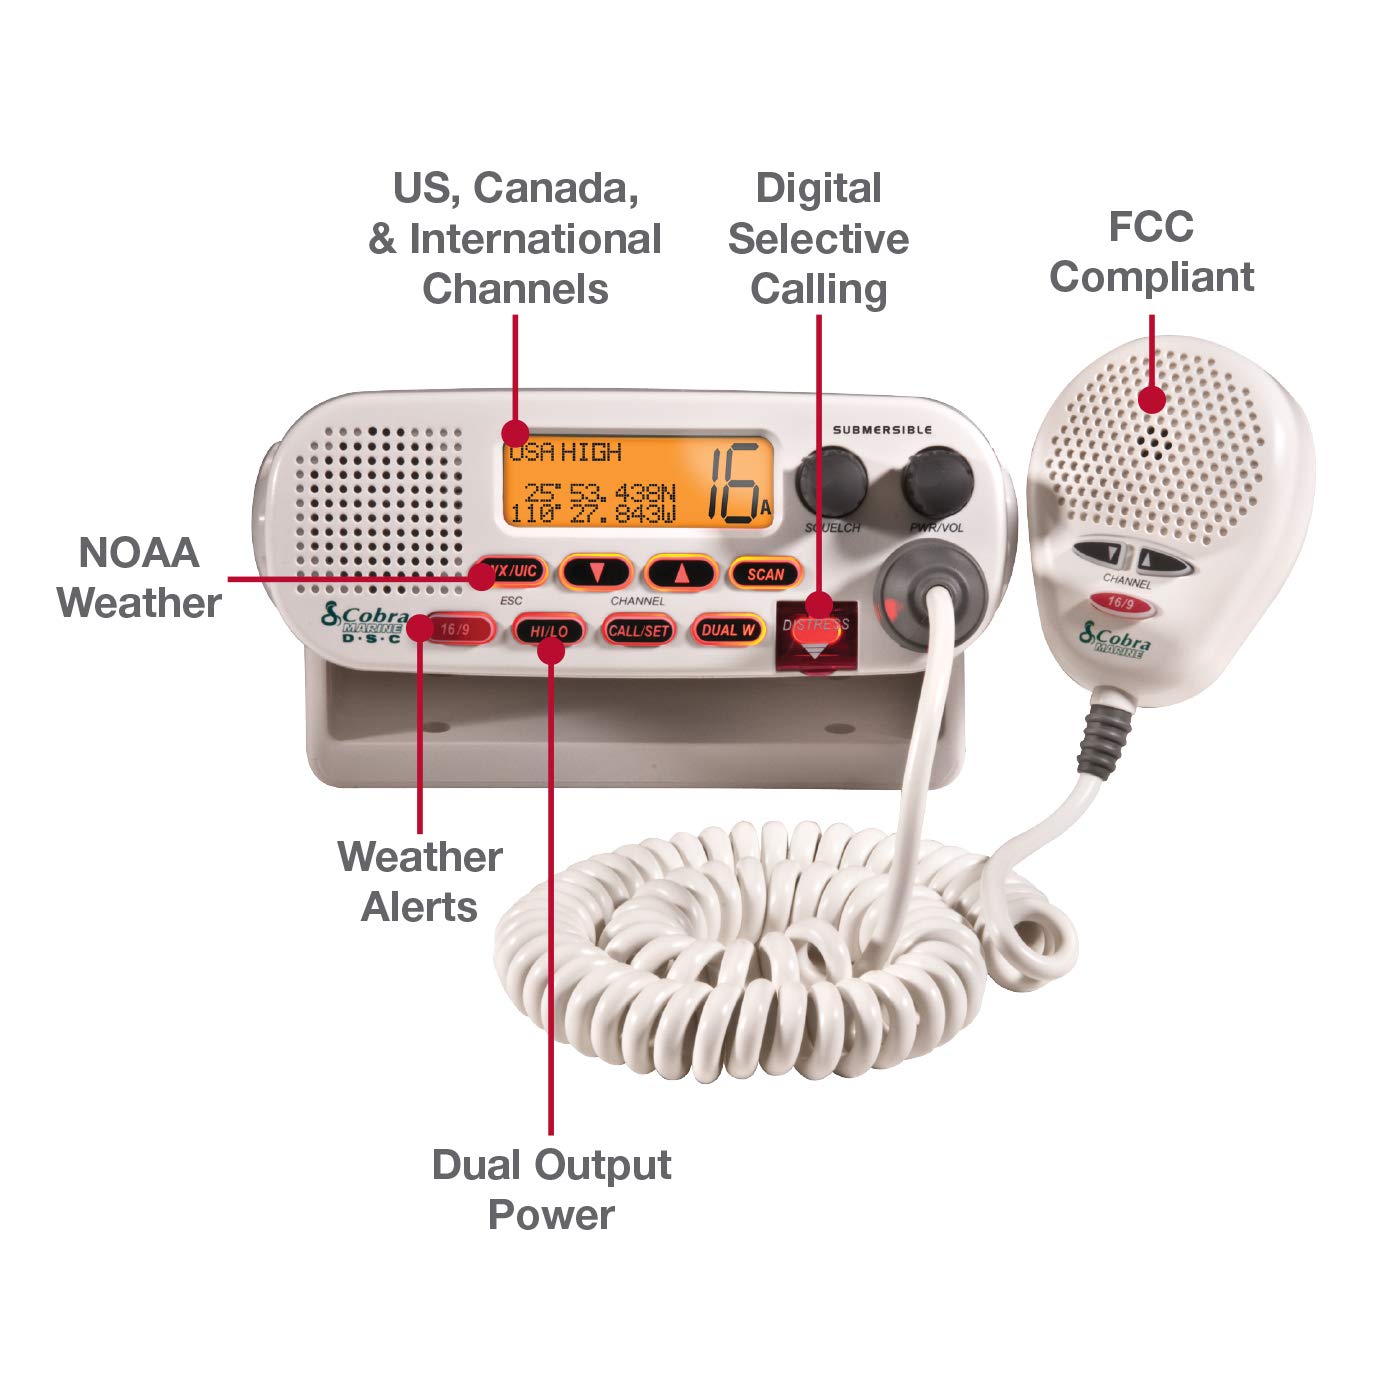 Cobra MR F45-D Fixed Mount VHF Marine Radio – 25 Watt VHF, Submersible, LCD Display, Noise Cancelling Microphone, NOAA Weather Channels, Signal Strength Meter, Scan Channels, White